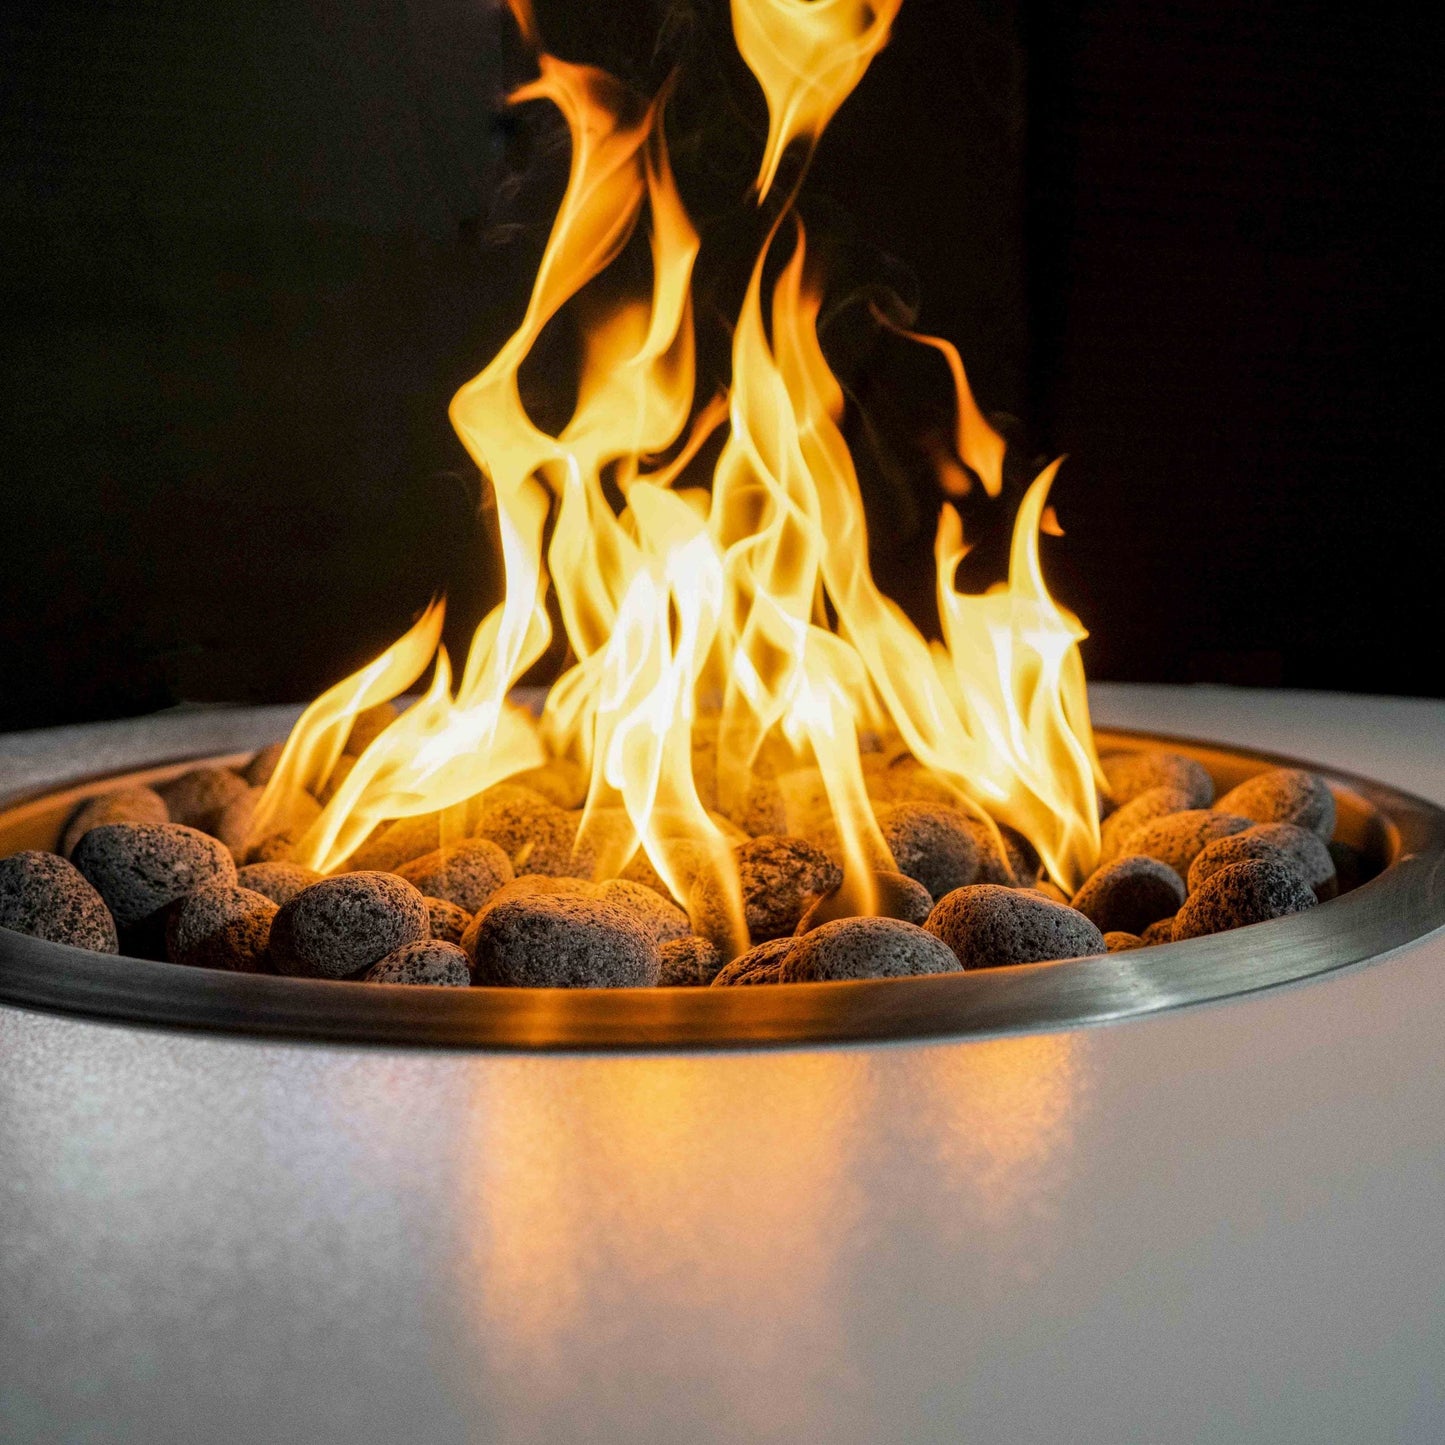 The Outdoor Plus Isla 42" White Powder Coated Metal Natural Gas Fire Pit with 110V Electronic Ignition